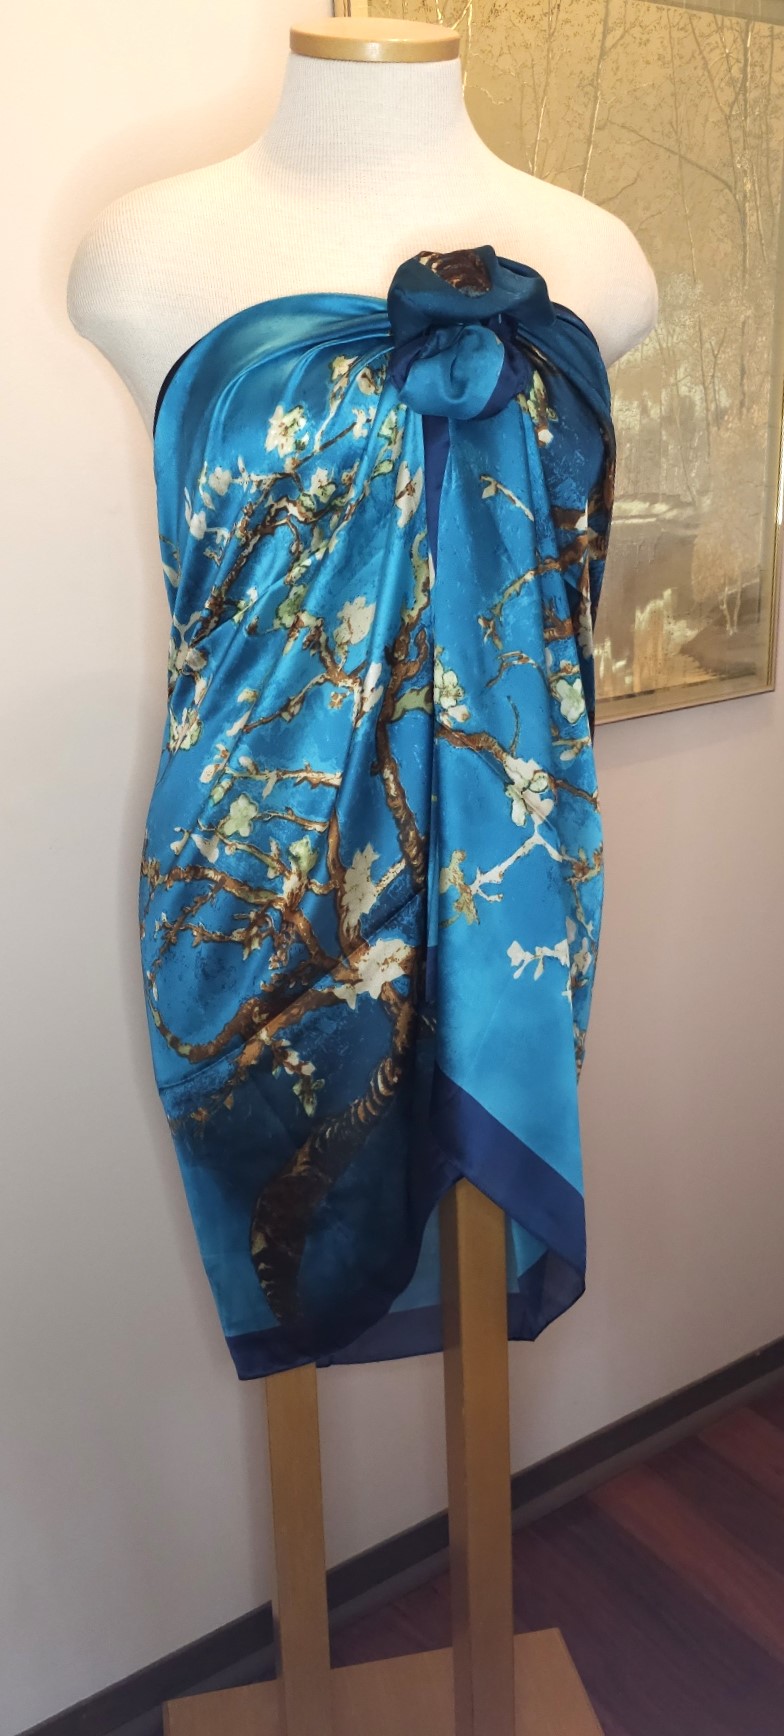 This Modern Shawl Wrap / Scarf / Beachwear / Sarong /Cover-up -Teal Cypress Tree- Silk - 35" x 72" is made with love by The Creative Soul Sisters! Shop more unique gift ideas today with Spots Initiatives, the best way to support creators.